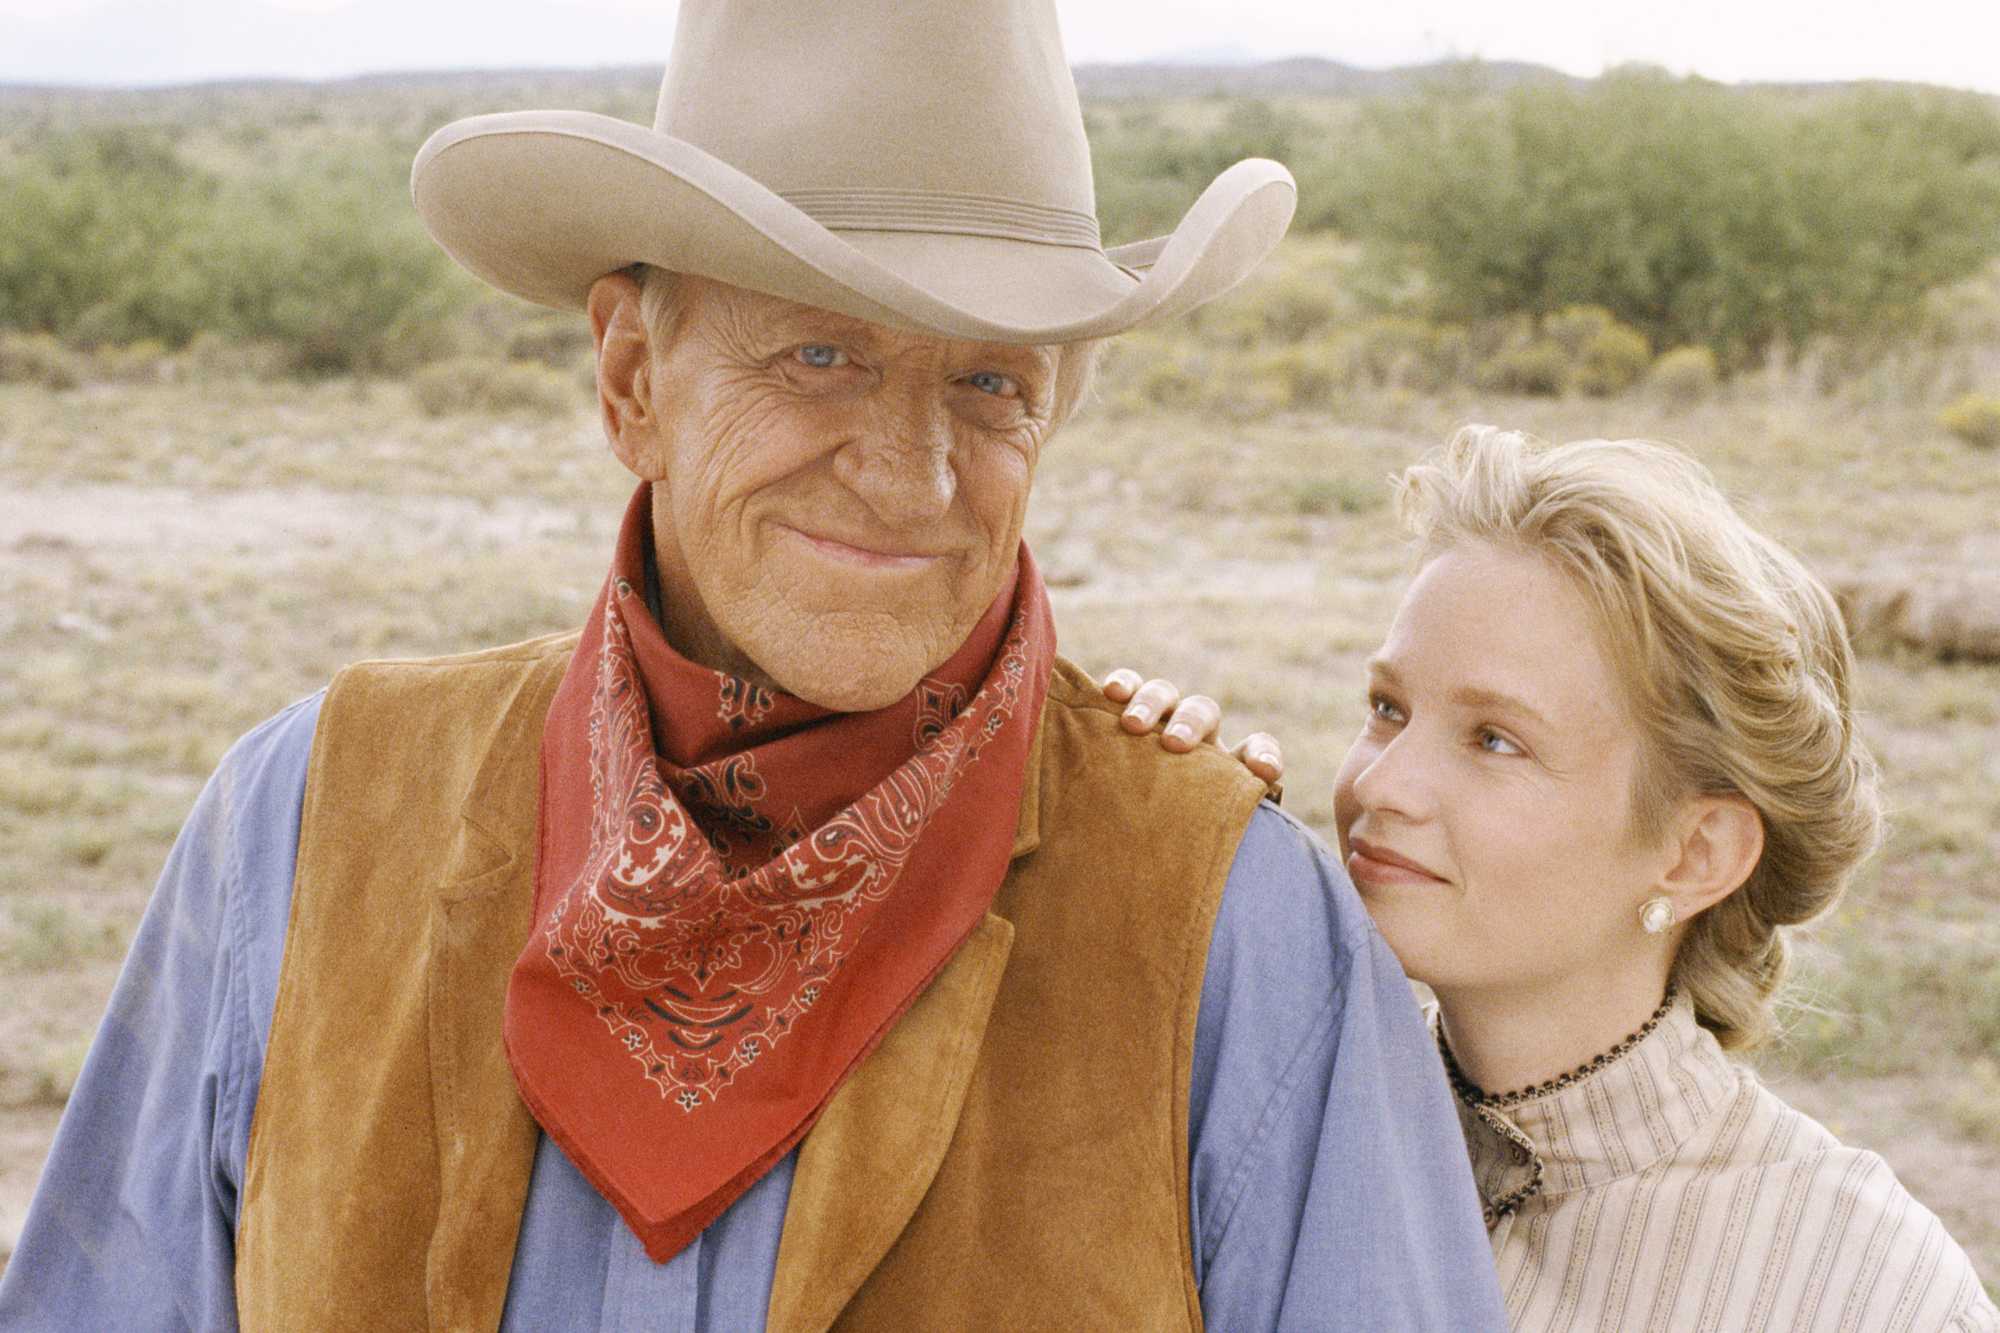 'Gunsmoke: One Man's Justice' James Arness as Matt Dillon and Amy Stoch as Beth Readon. Matt is smiling, wearing a Western outfit, while Beth is holding onto his arm and resting her head on his shoulder, looking up at him.